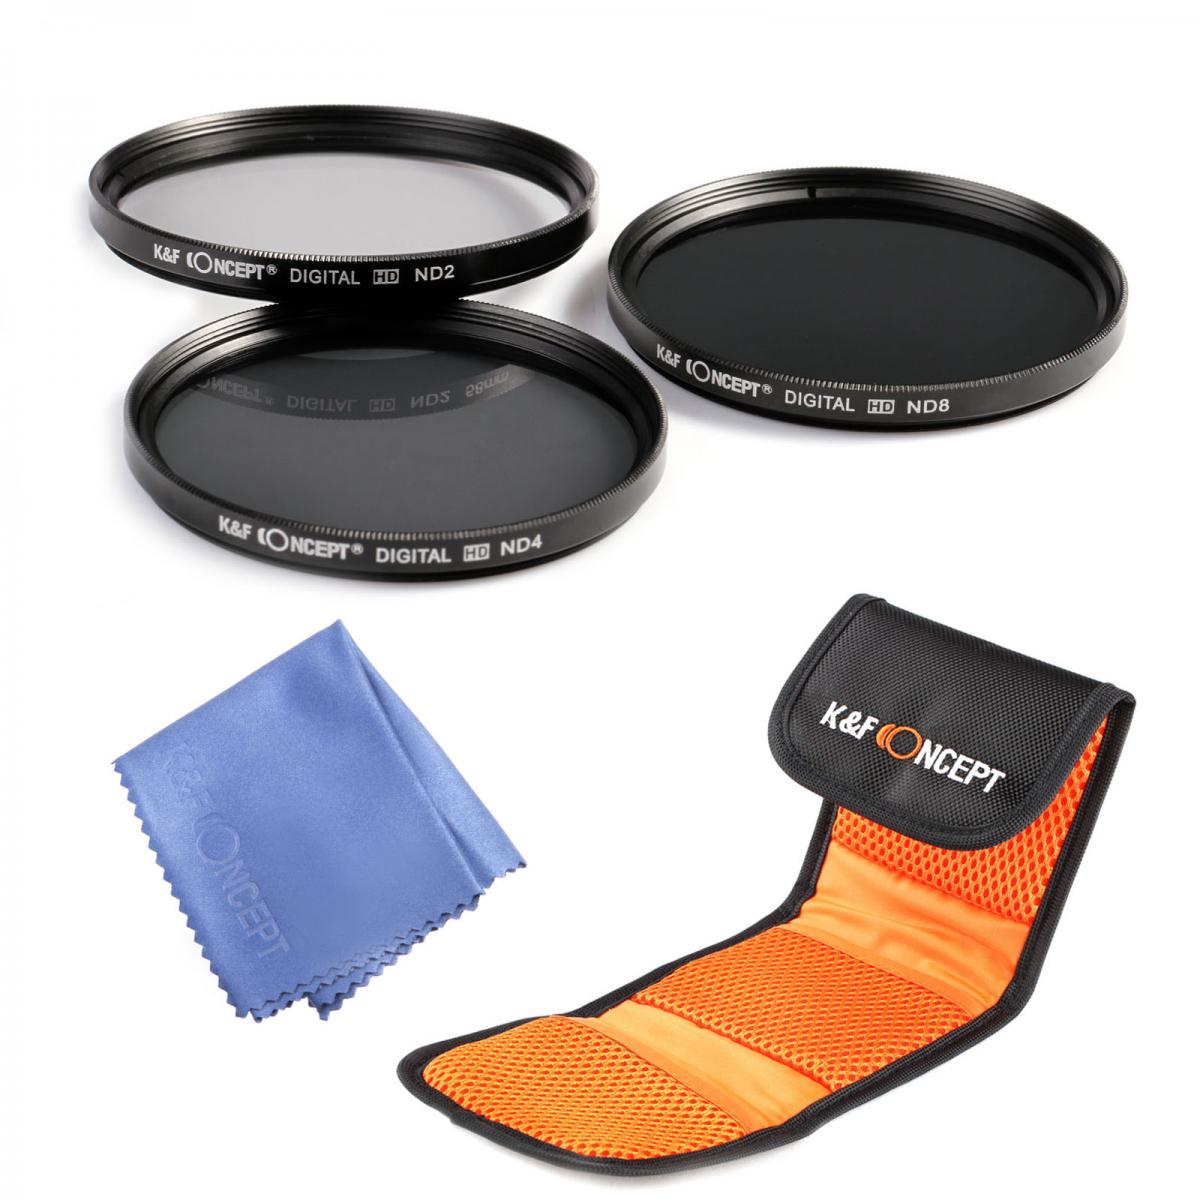 Microfiber Cleaning Cloth 72mm High Resolution Clear Digital UV Filter with Multi-Resistant Coating for Sony Alpha DSLR-A850 